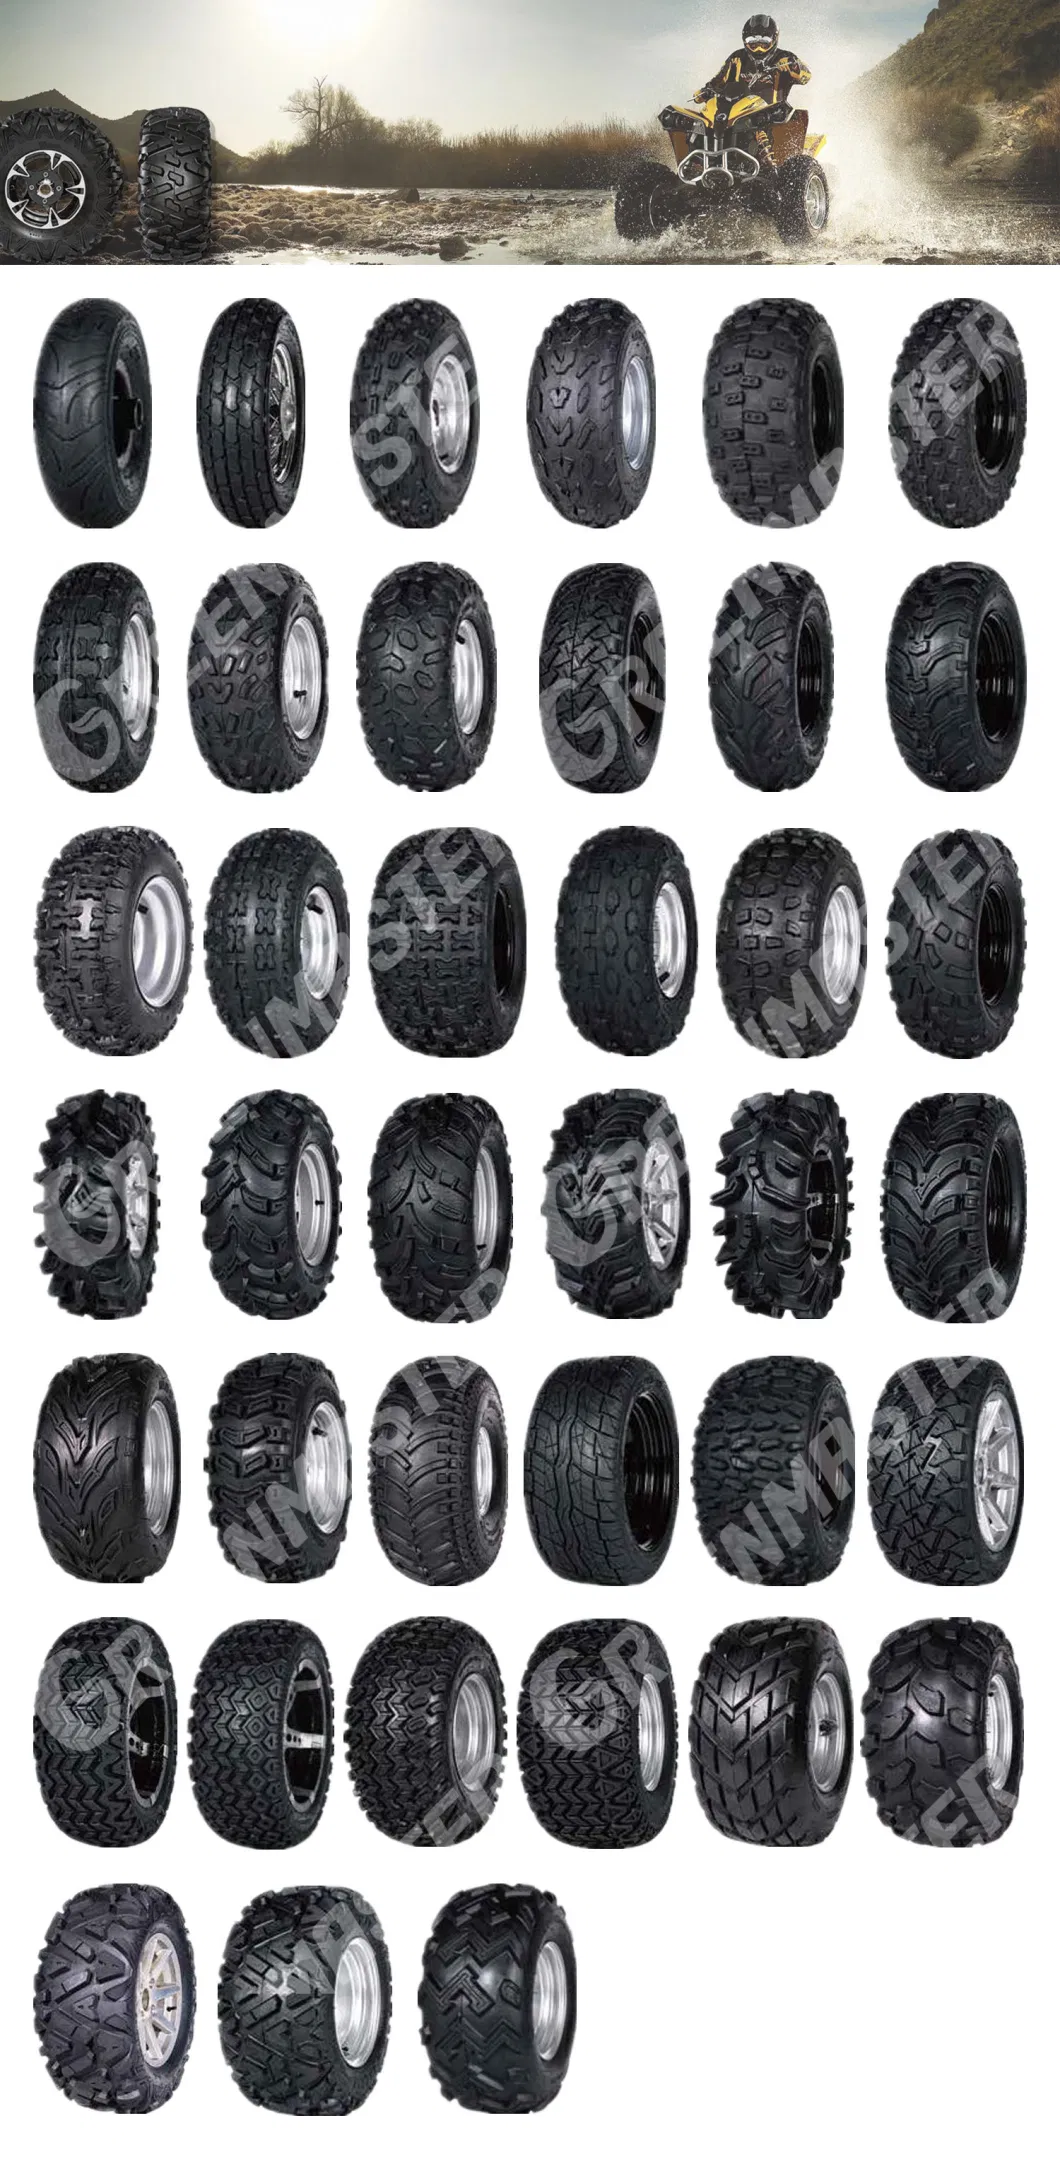 ATV Tire, Sand Beach Quad Tyre, Offroad Side-by-Side(Sxs) Tires, UTV/Muv Tyres 25X10.00-12(250/65-12) 25X10.5-12 25*11-12(260/65-12) with Aluminum/Steel Wheel